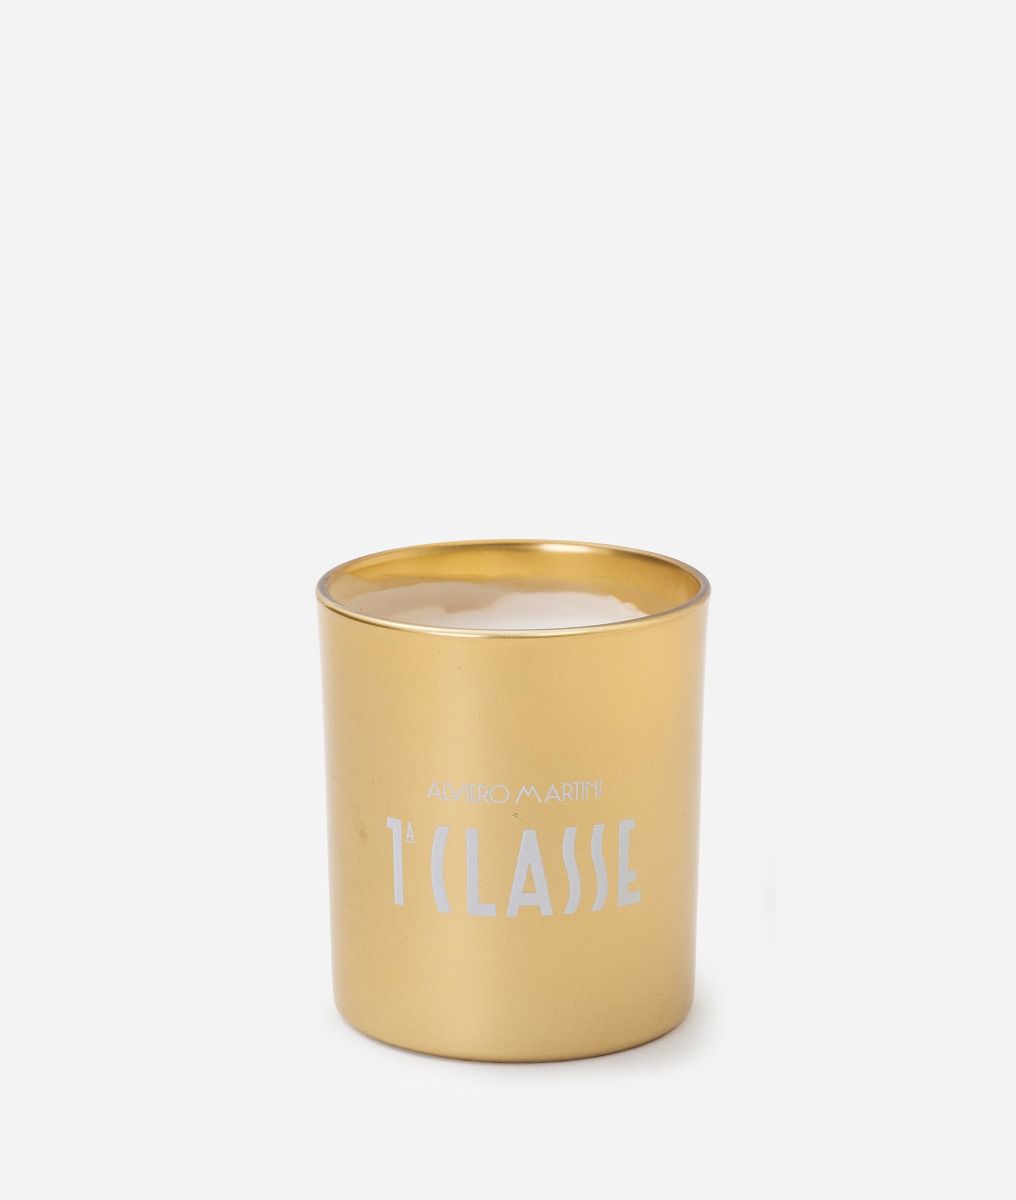 Scented candle with Alviero Martini 1ᴬ Classe logo Gold,front